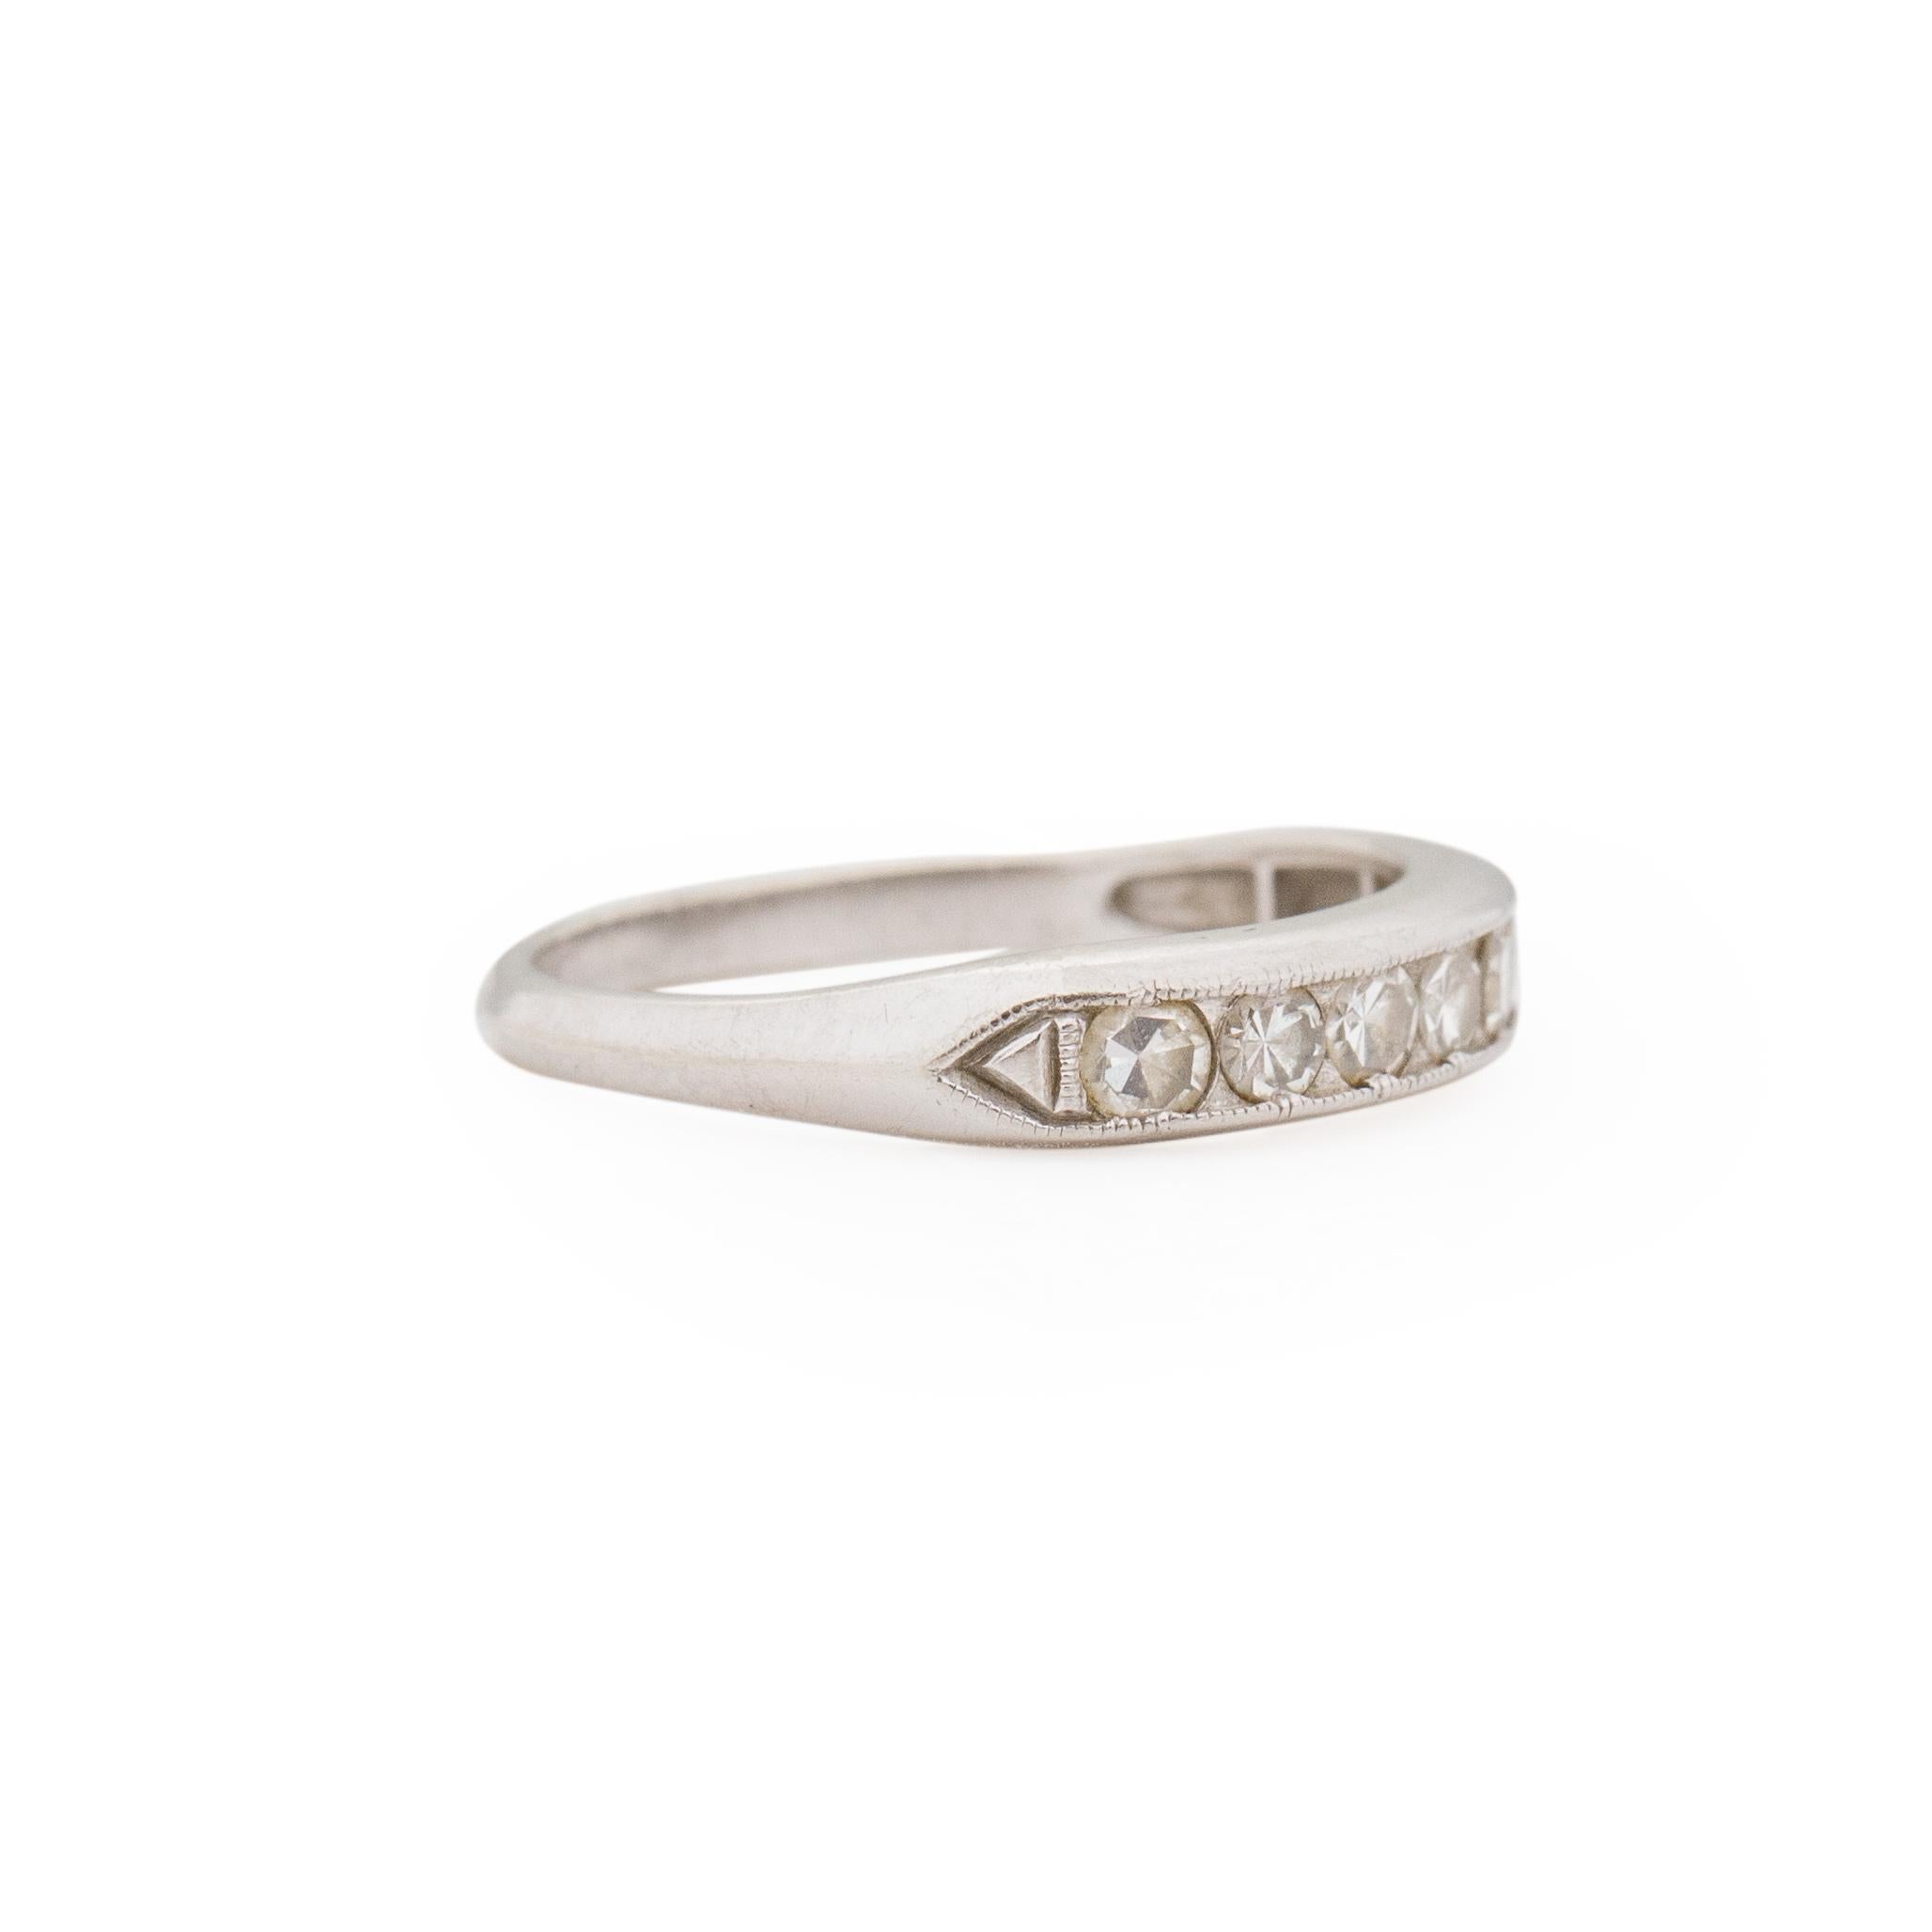 This deco beauty us a simple design, making it the perfect fit for any vintage or antique engagement ring weather it be for the big day or an anniversary surprise. This band is crafted in 18K white gold, along the top is seven beautiful single cut